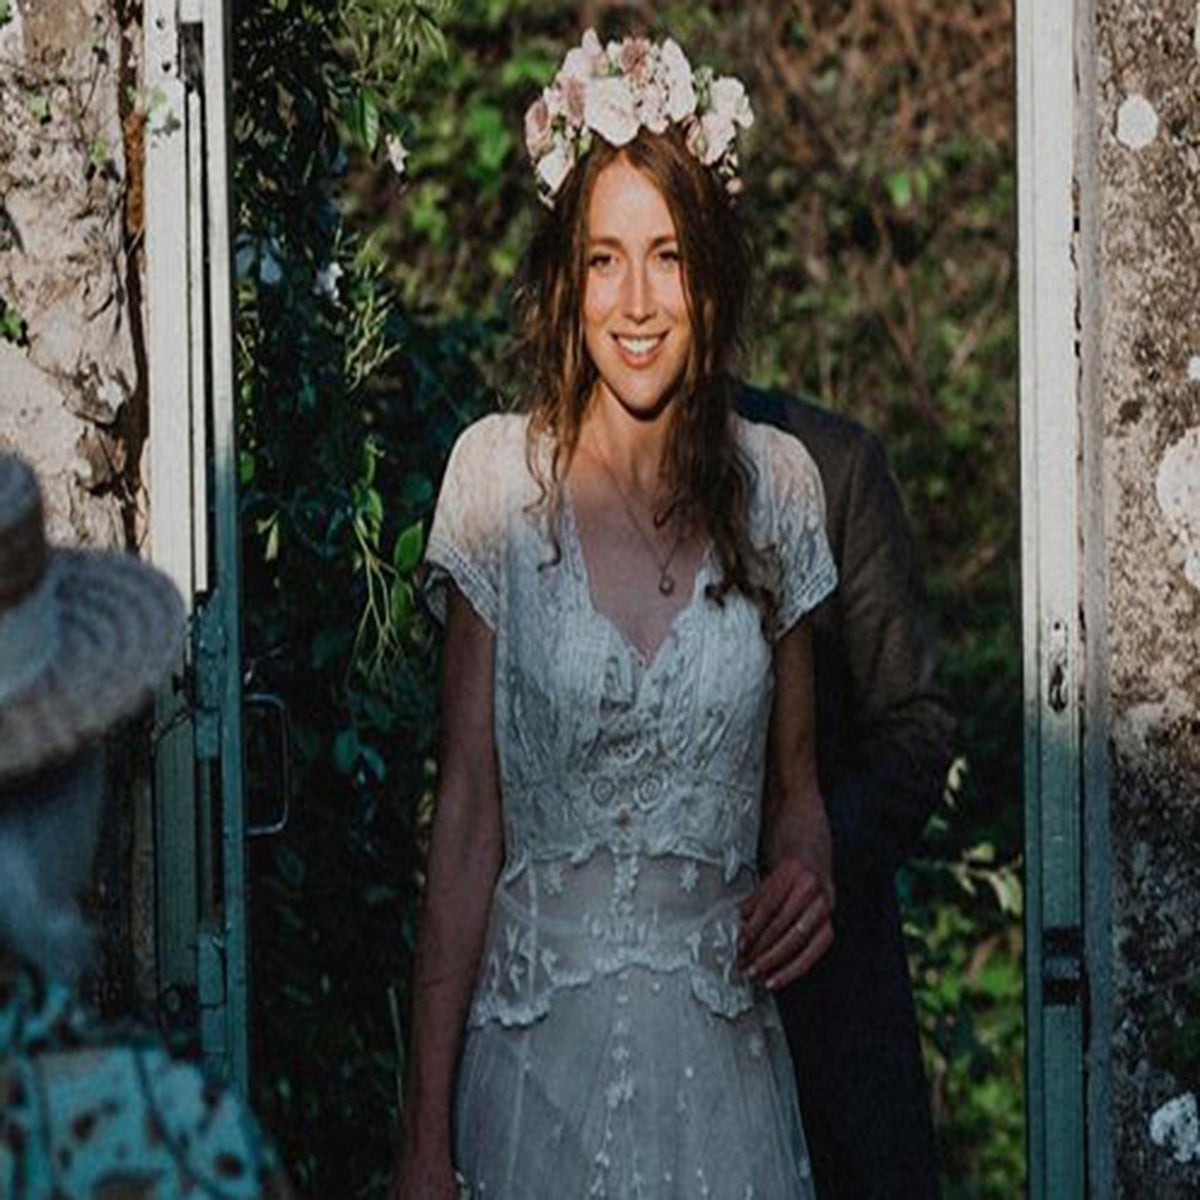 https://static.independent.co.uk/s3fs-public/thumbnails/image/2017/02/11/21/tess-newall-wedding-dress.jpg?width=1200&height=1200&fit=crop